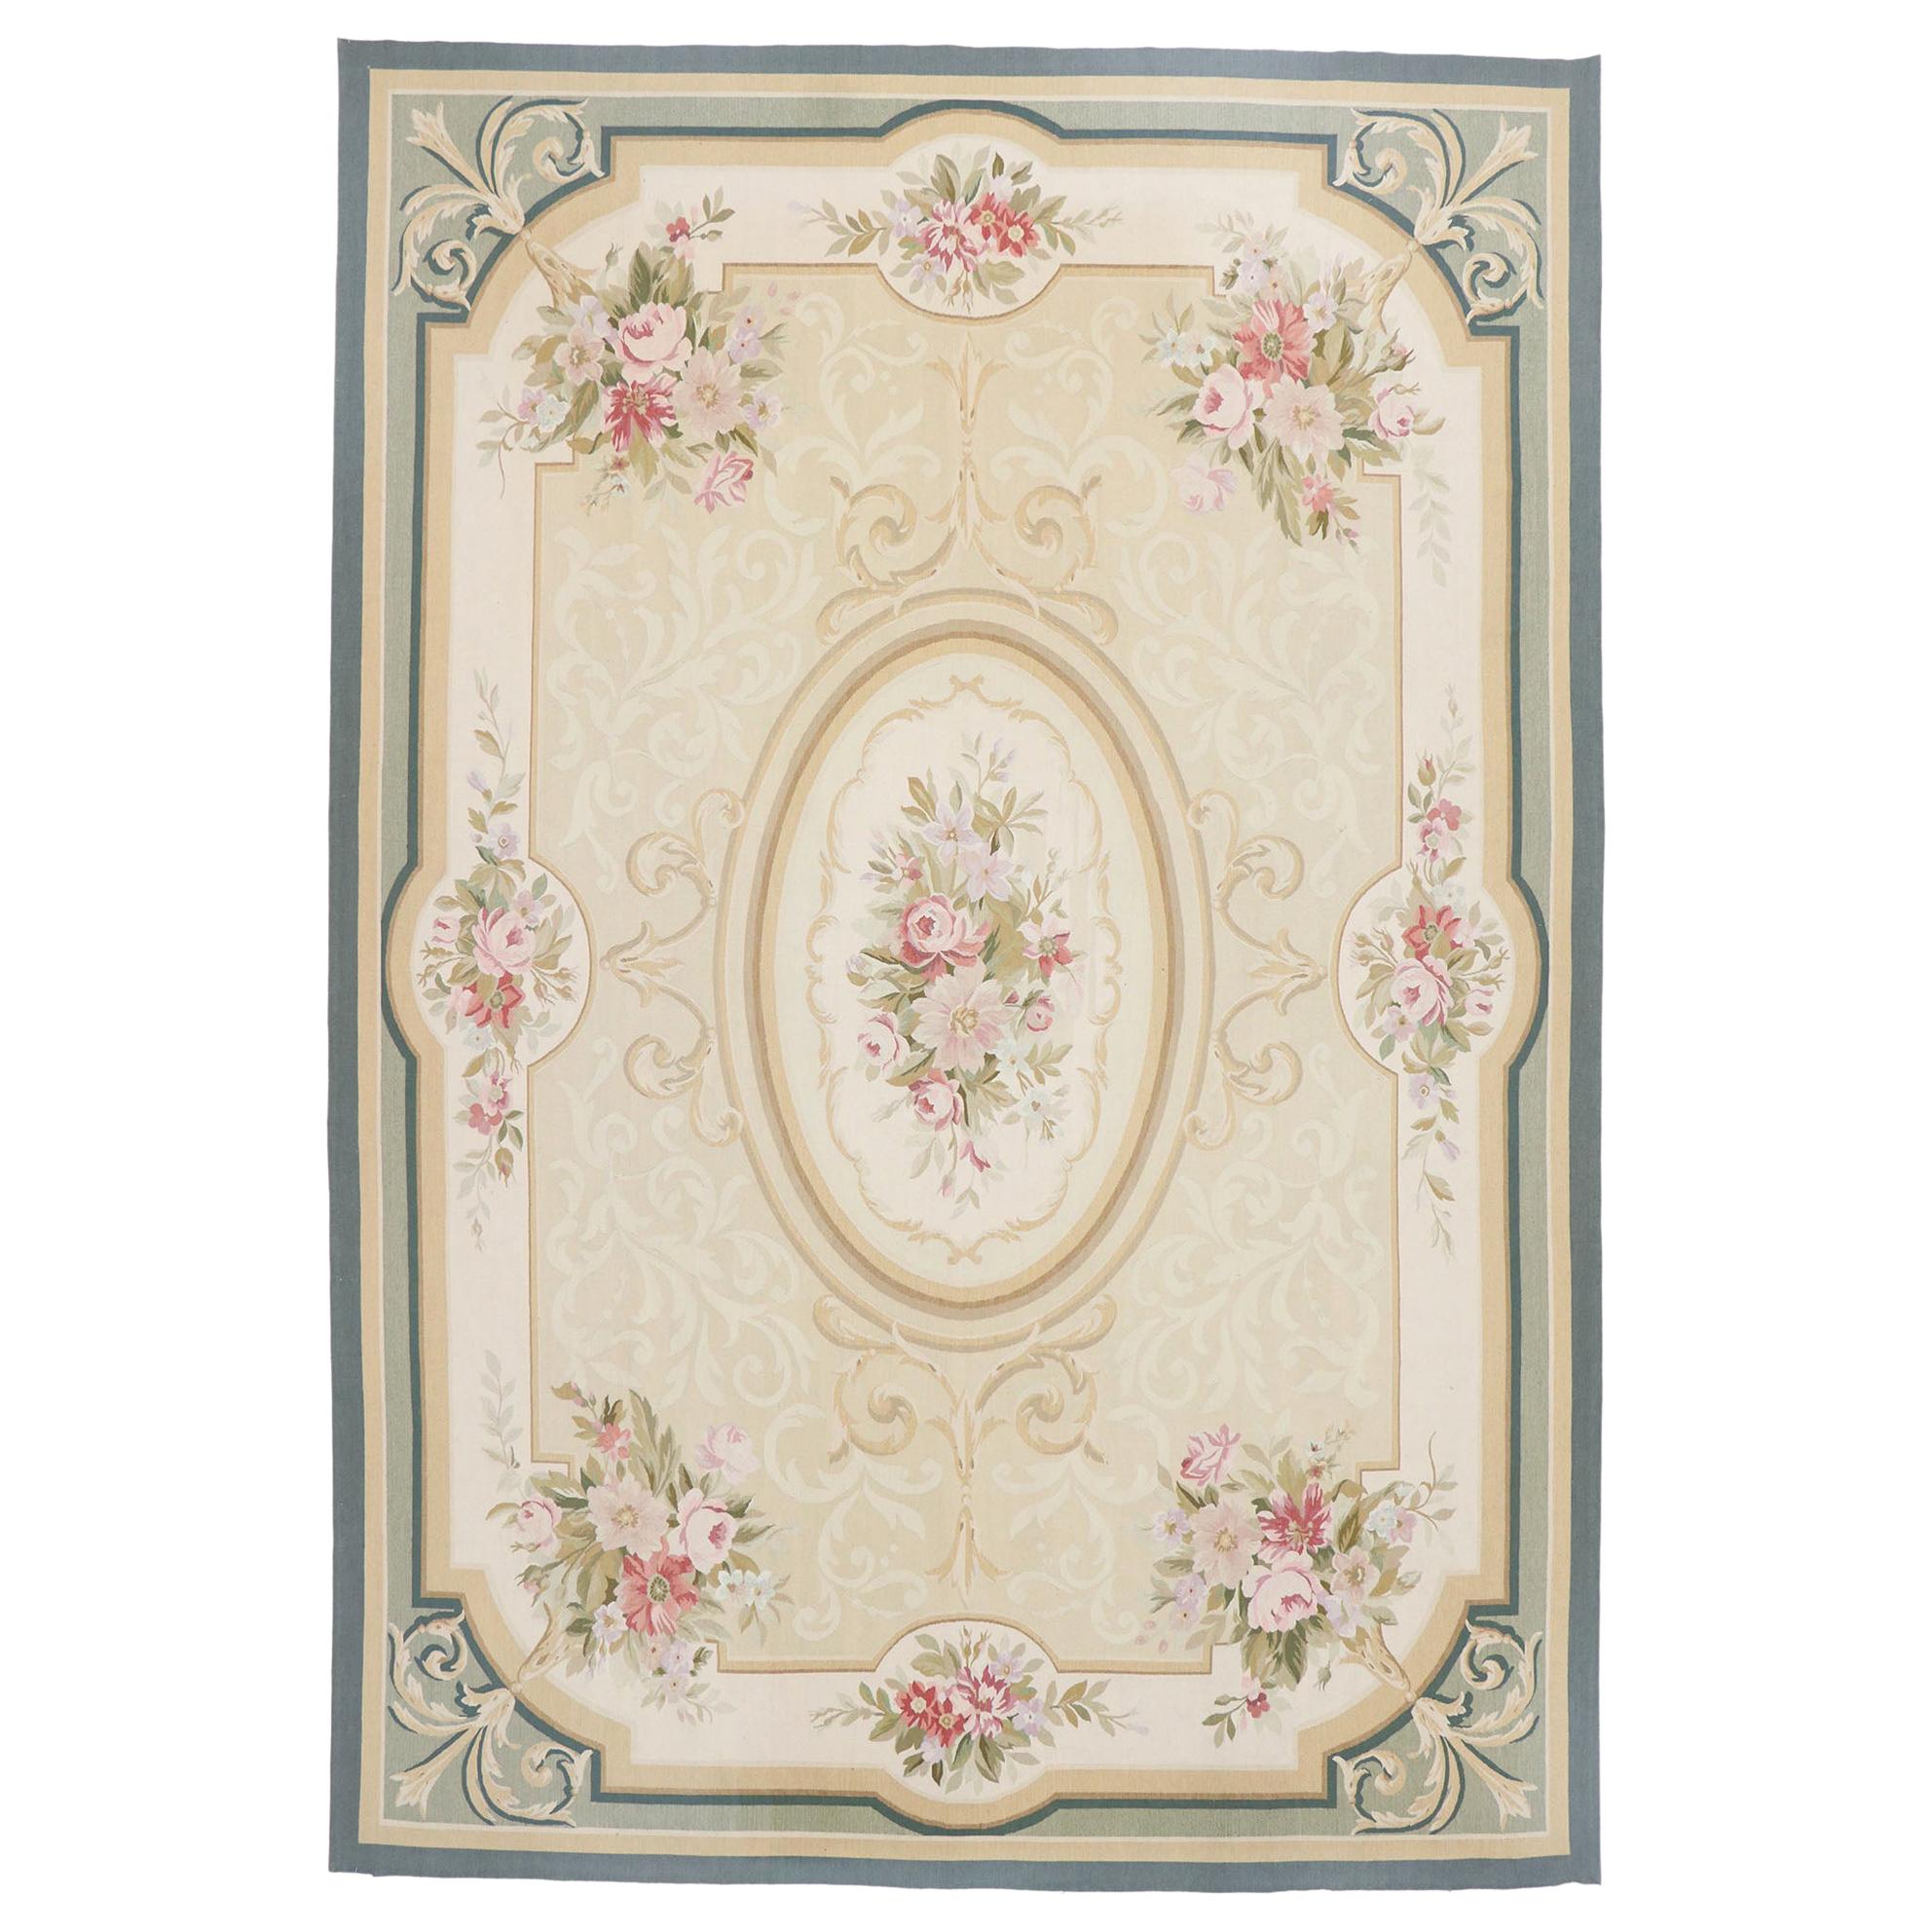 Vintage French Aubusson Rug with Regal Romantic Rococo Style